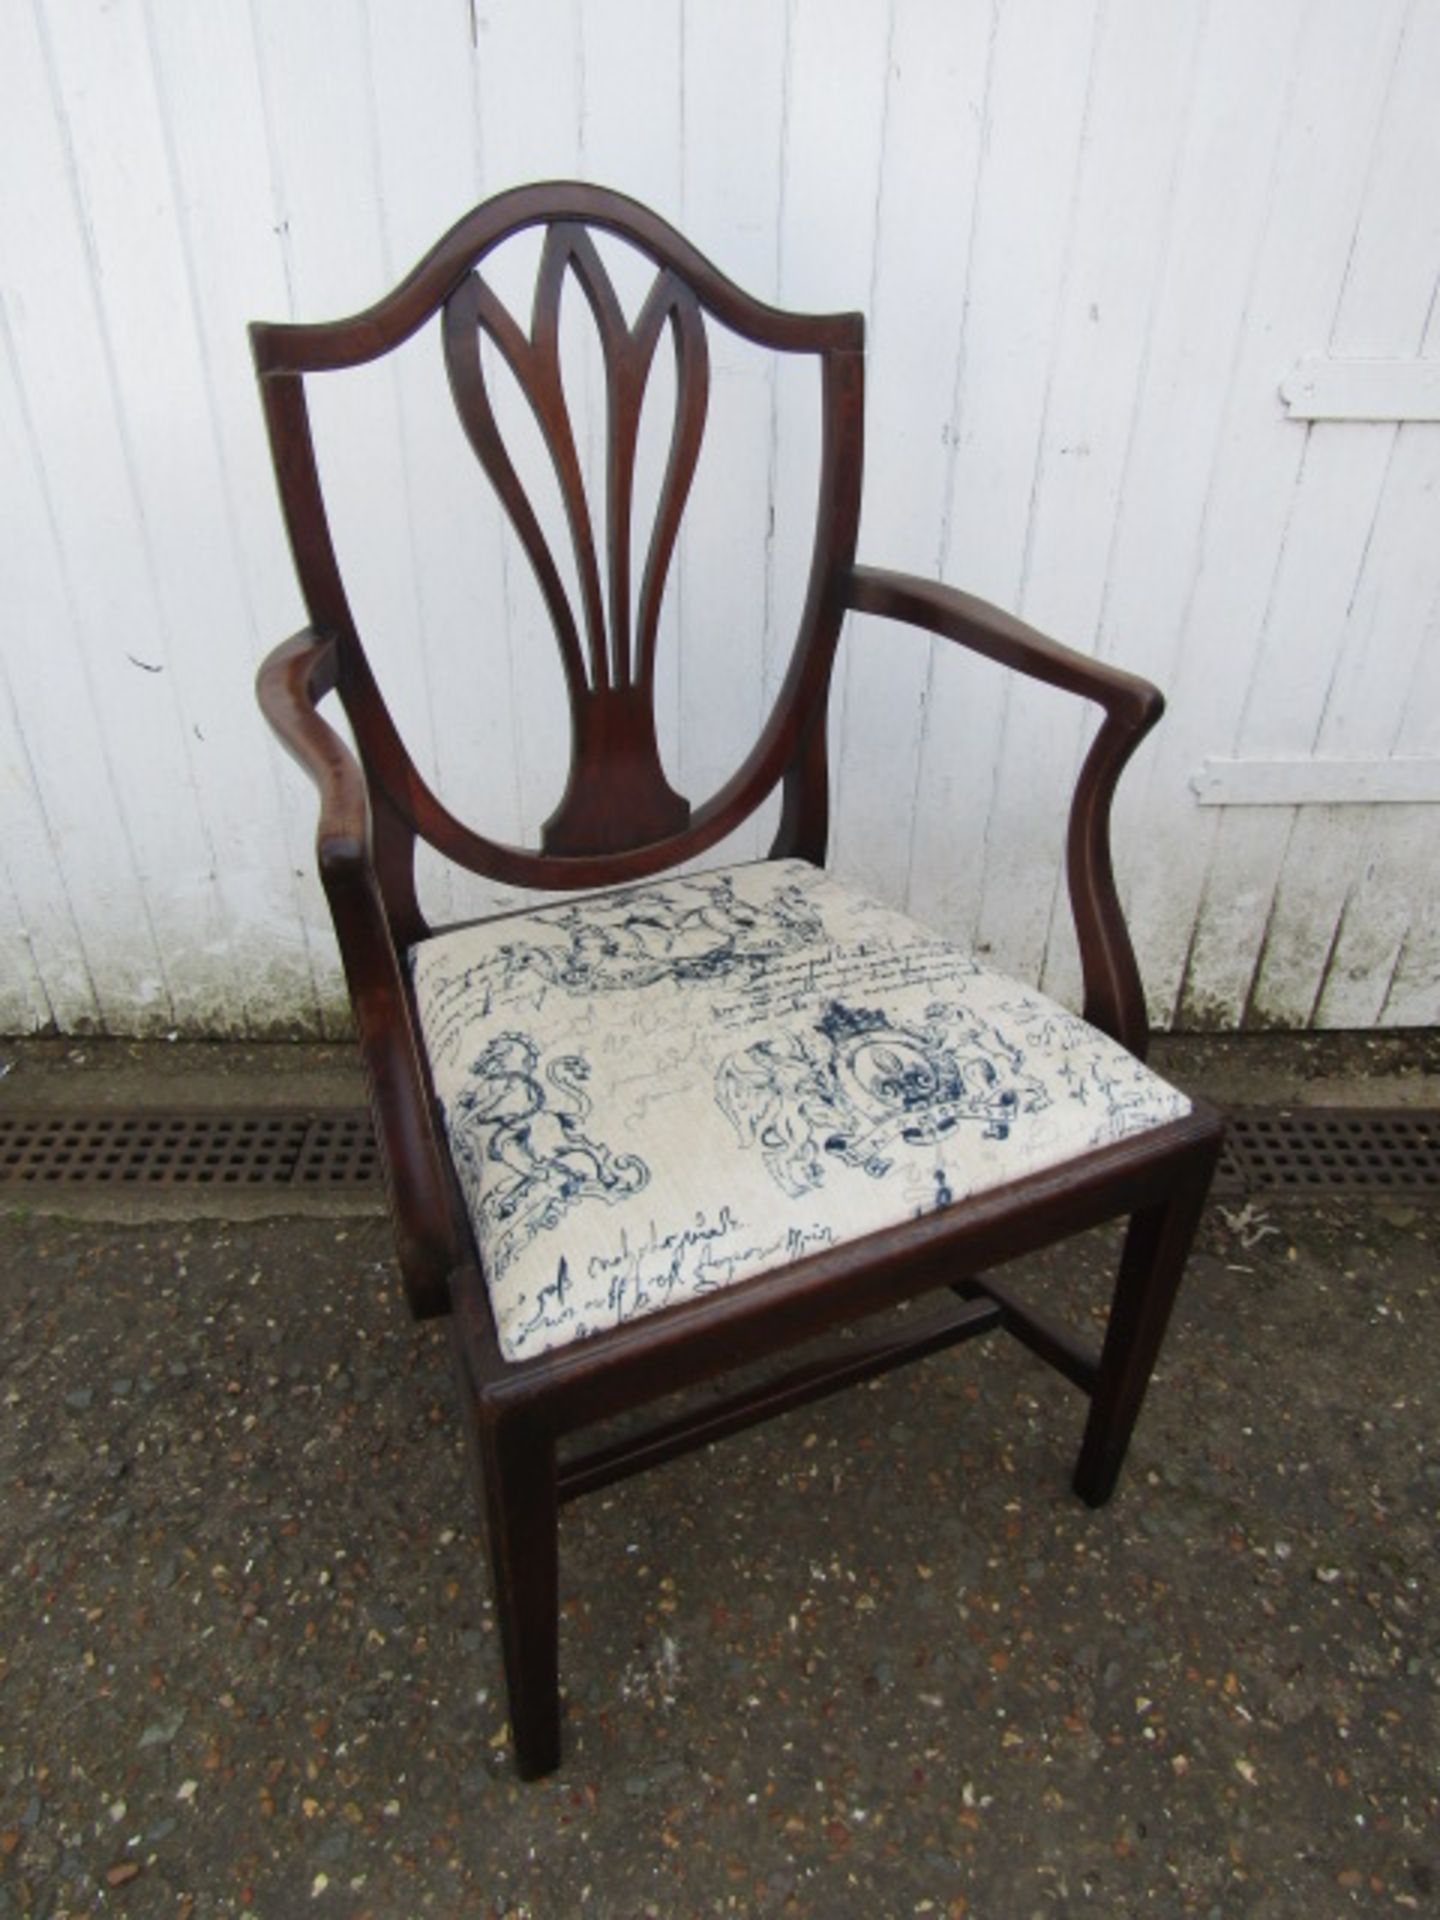 upholstered open arm chair